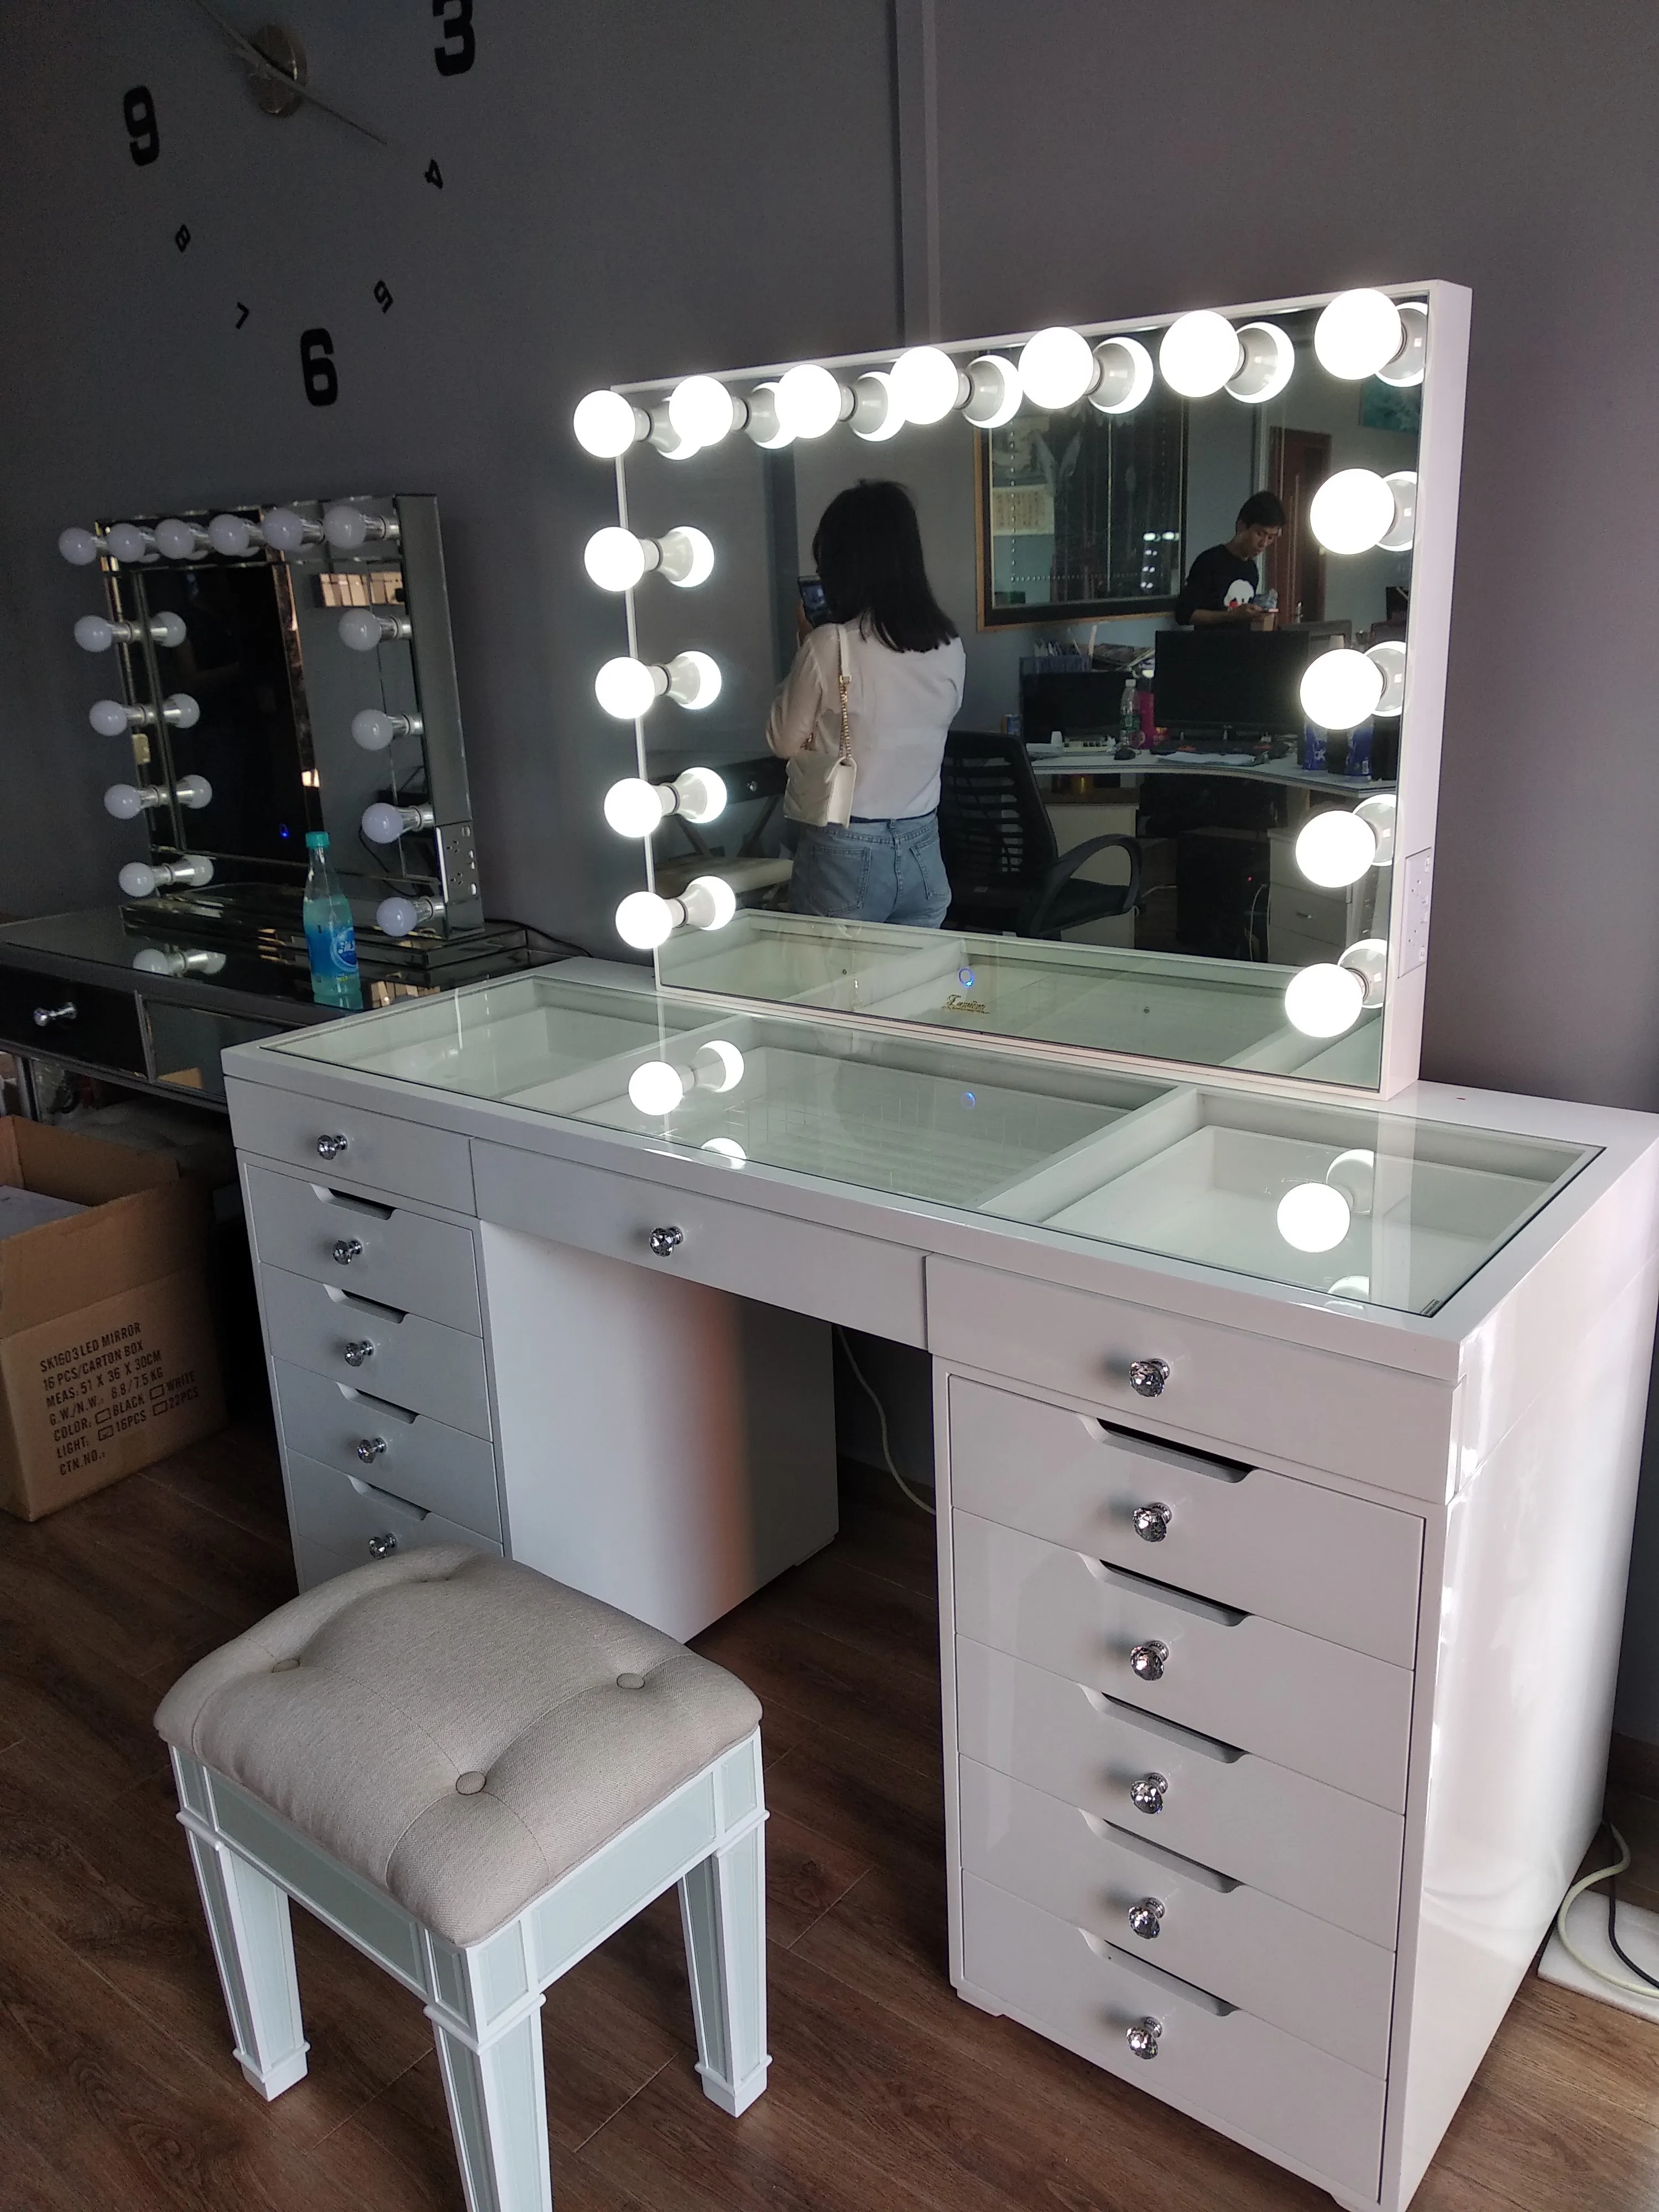 14 Leds Wood Makeup Vanity Table With Mirror Set Dressing Table With Mirror And Draws Makeup Table Vanity Set With Mirror Buy Vanity Makeup Table With Mirror